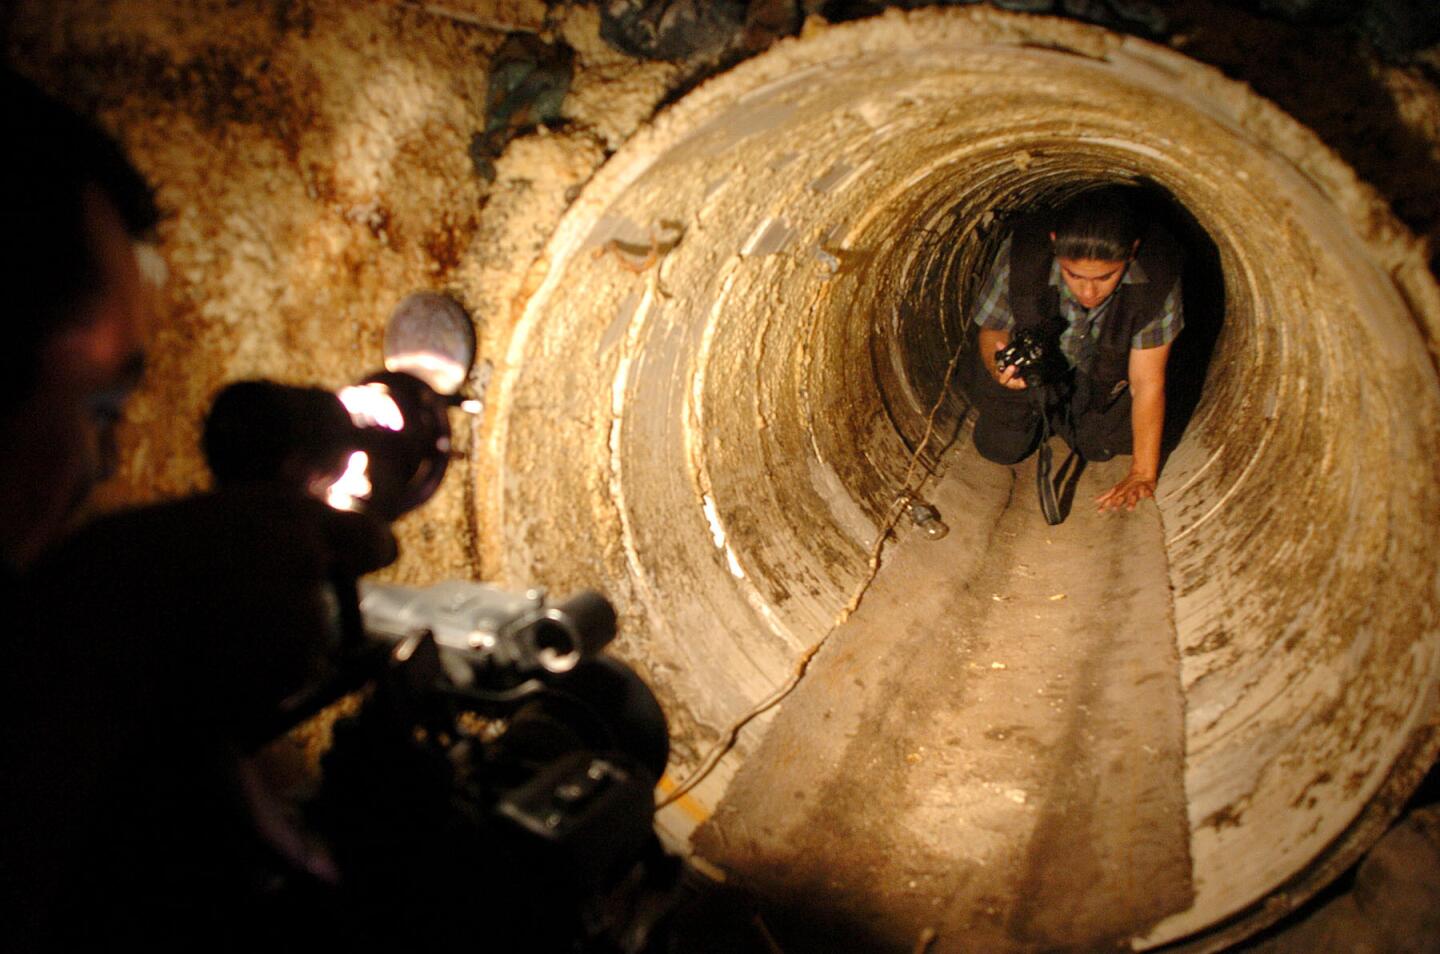 Tunnels used by the Mexican drug cartels